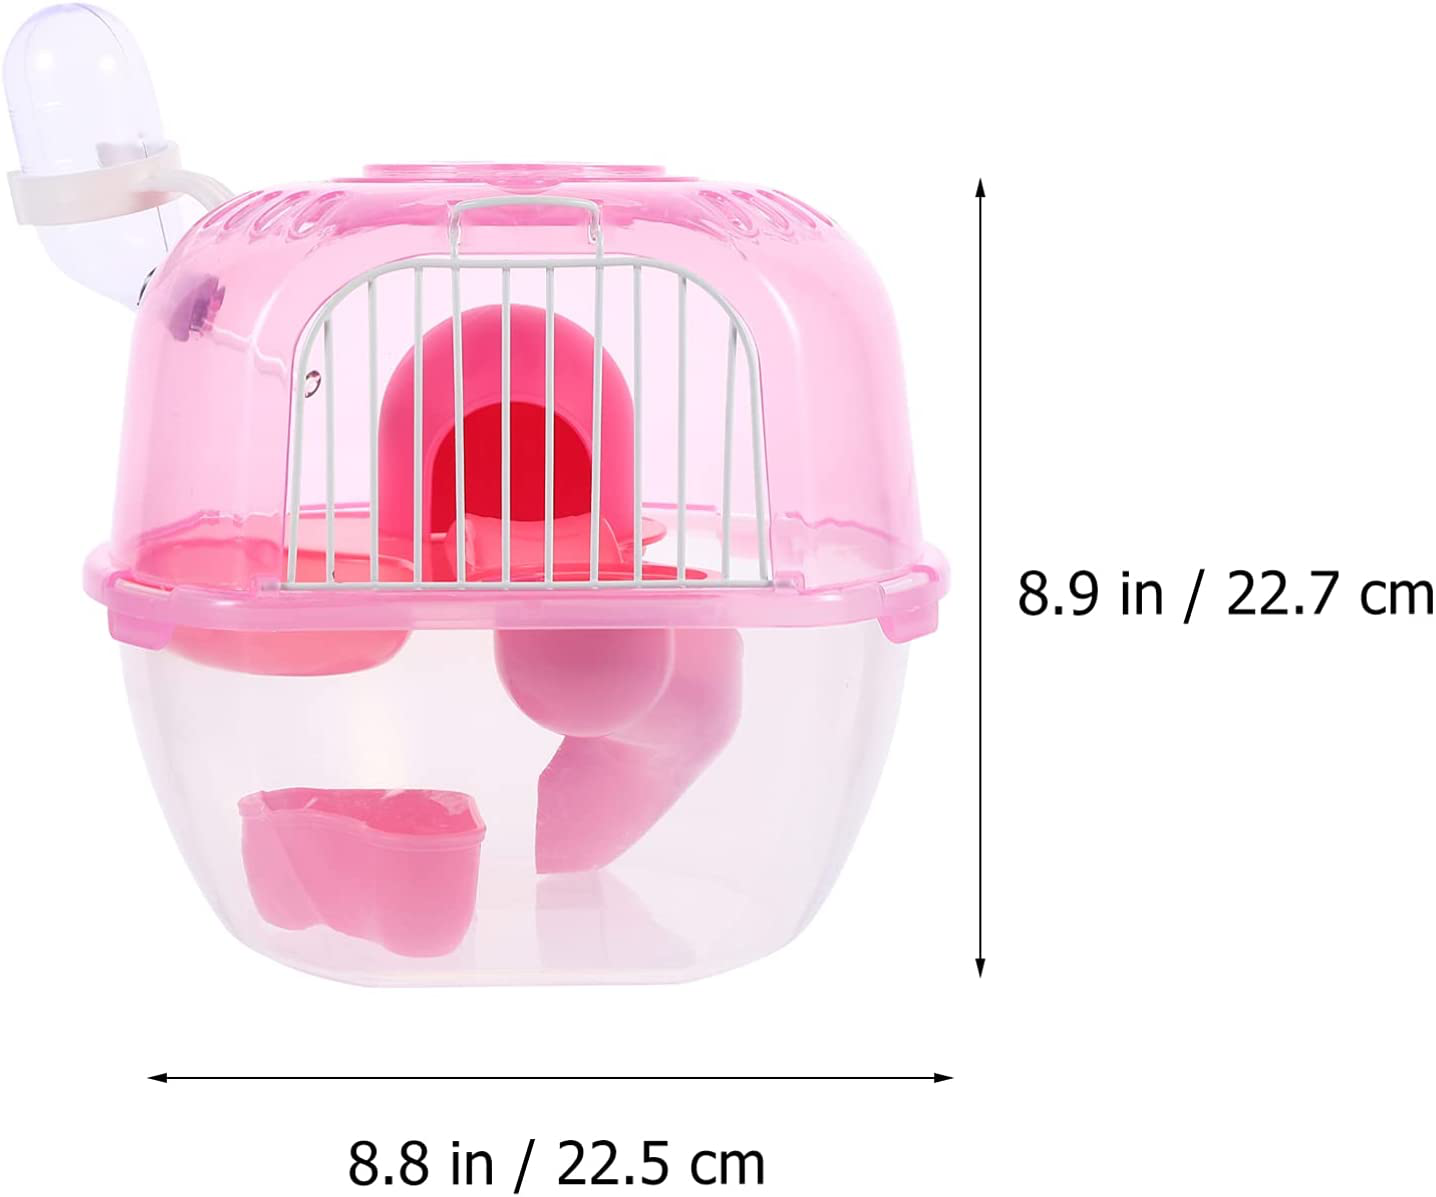 NUOBESTY Hamster Cage Habitat Small Animal Cage with Water Bottle for Ferret Chinchilla Hamster Suger Glider Gerbil Rats Mouse Mice Guinea Pig